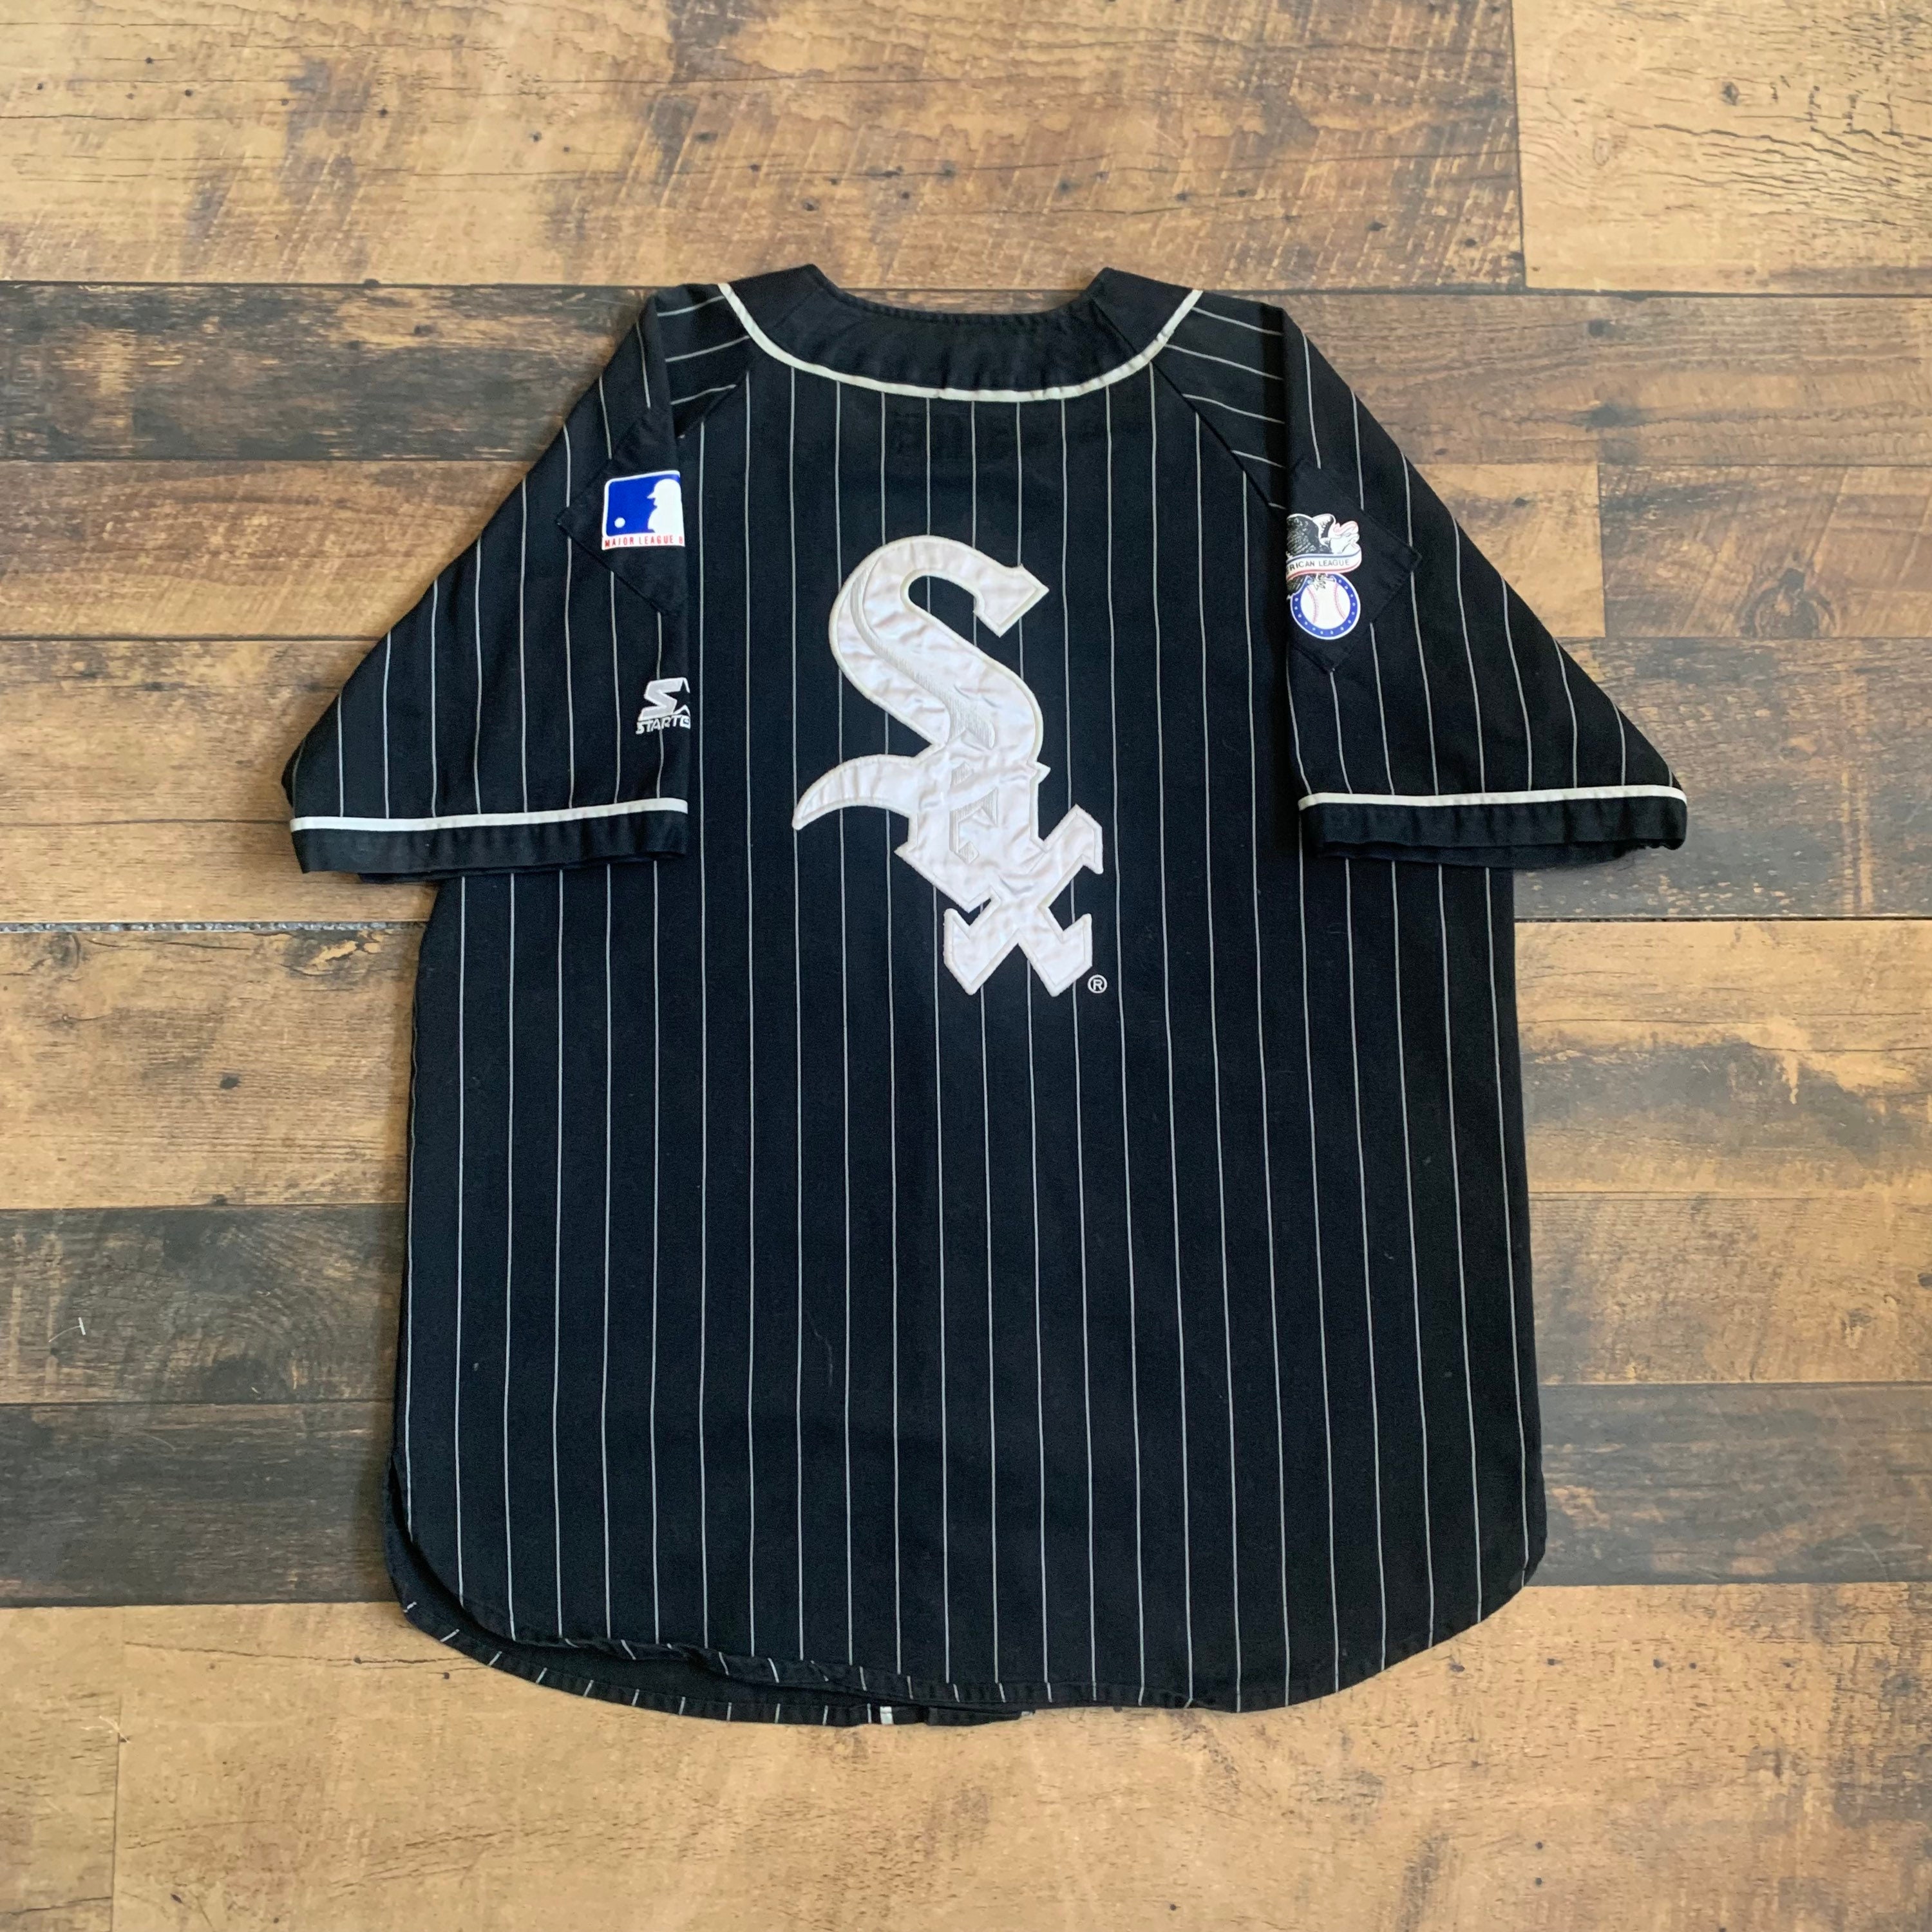 Buy 90s White Sox Jersey Online In India -  India